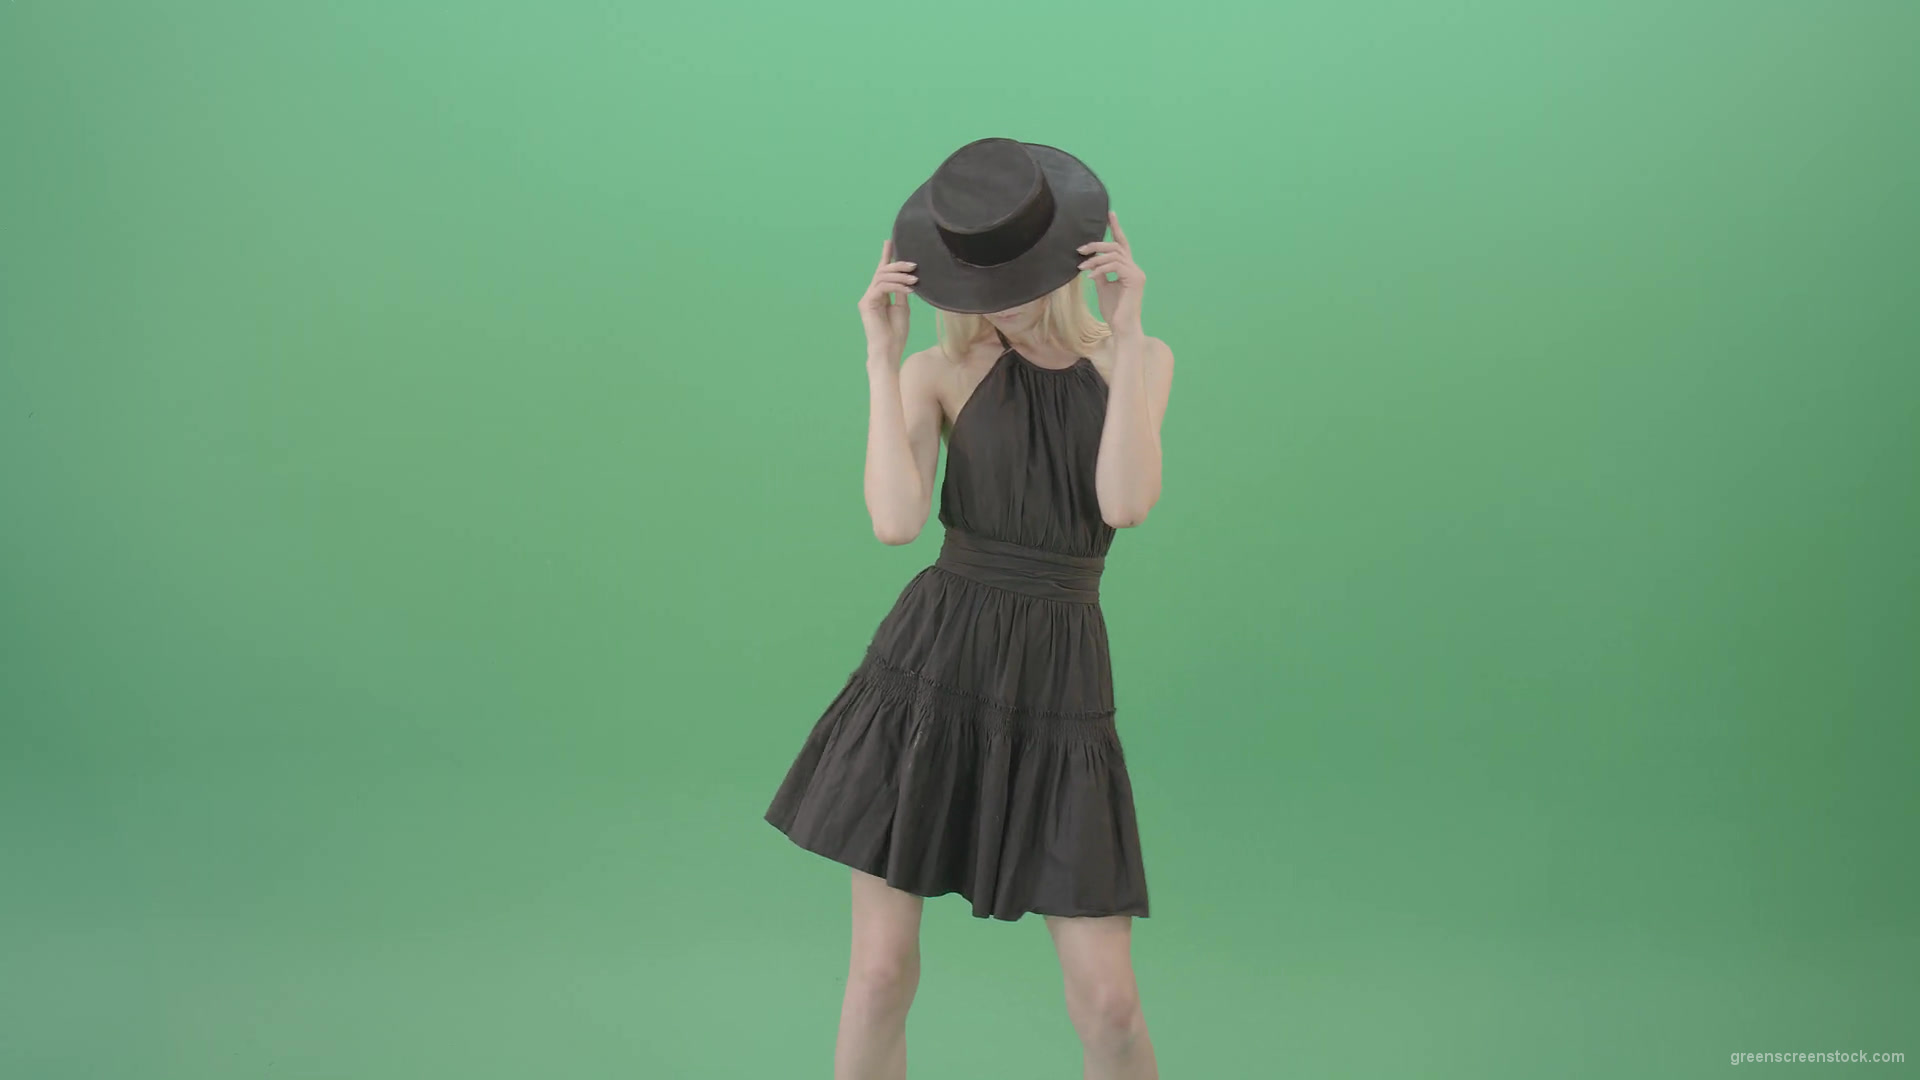 Elegant-girl-in-black-dress-and-hat-chilling-dance-isolated-on-green-screen-4K-Video-Footage-1920_007 Green Screen Stock